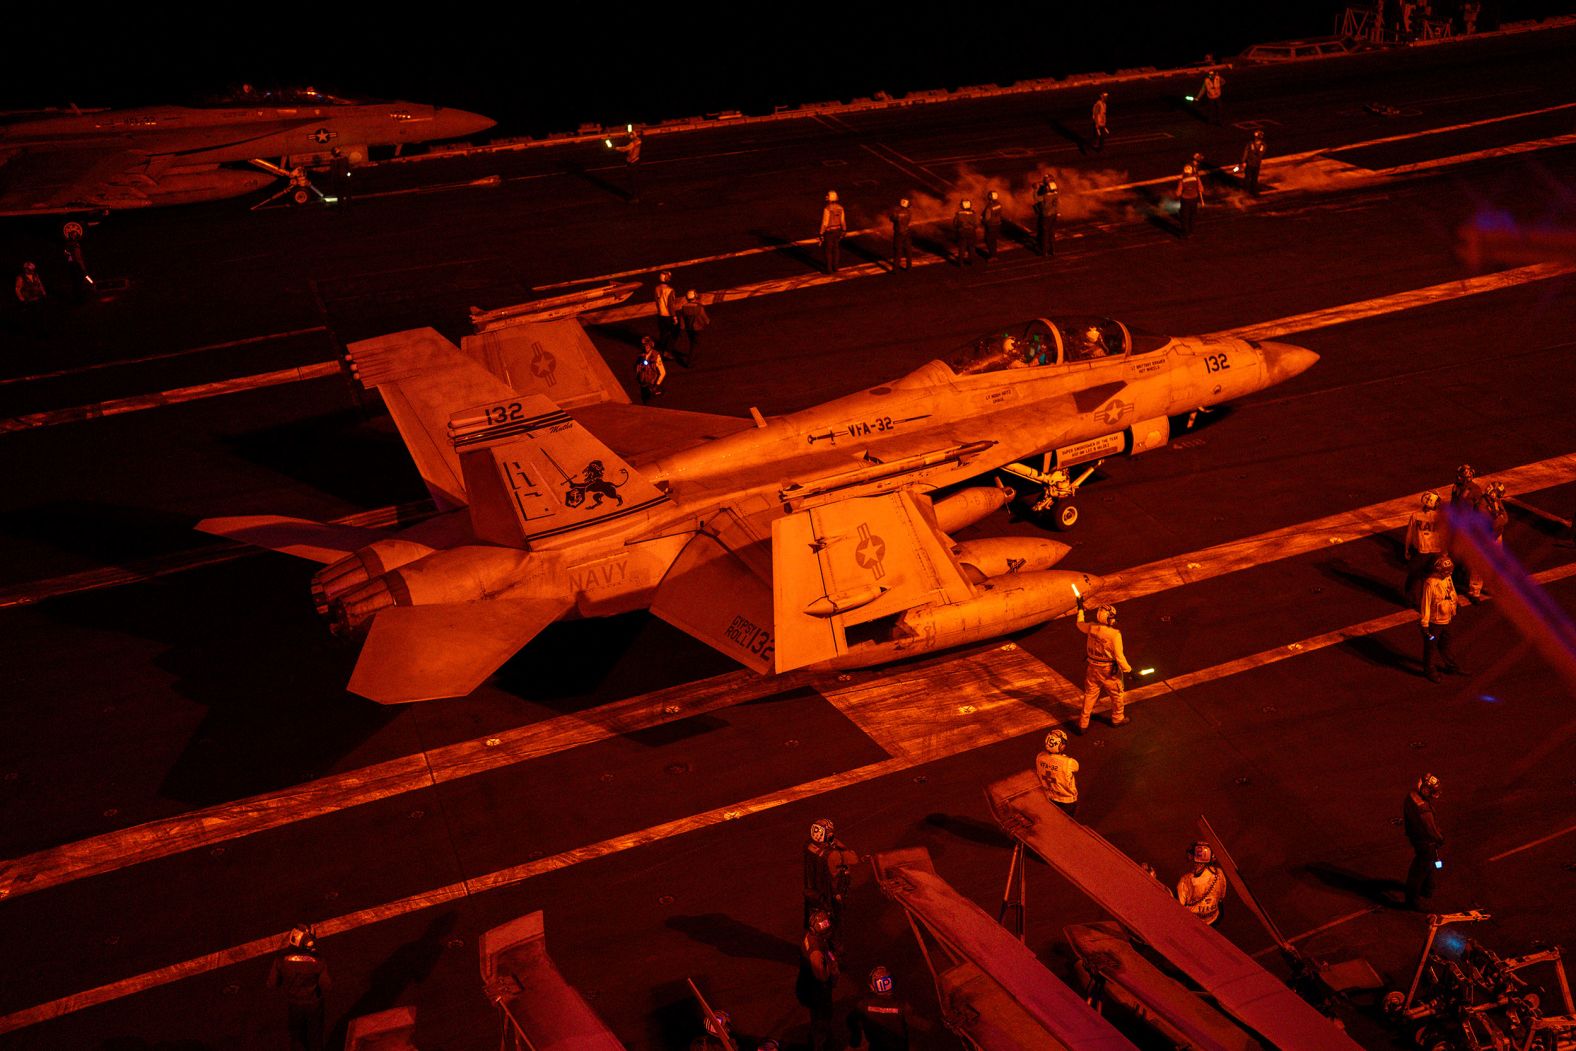 A fighter jet prepares to take off from the USS Dwight D. Eisenhower as it is deployed in the Red Sea on Monday, February 12. The aircraft carrier and the USS Gravely, a US Navy destroyer, are spearheading the US response to Houthi attacks in the region.